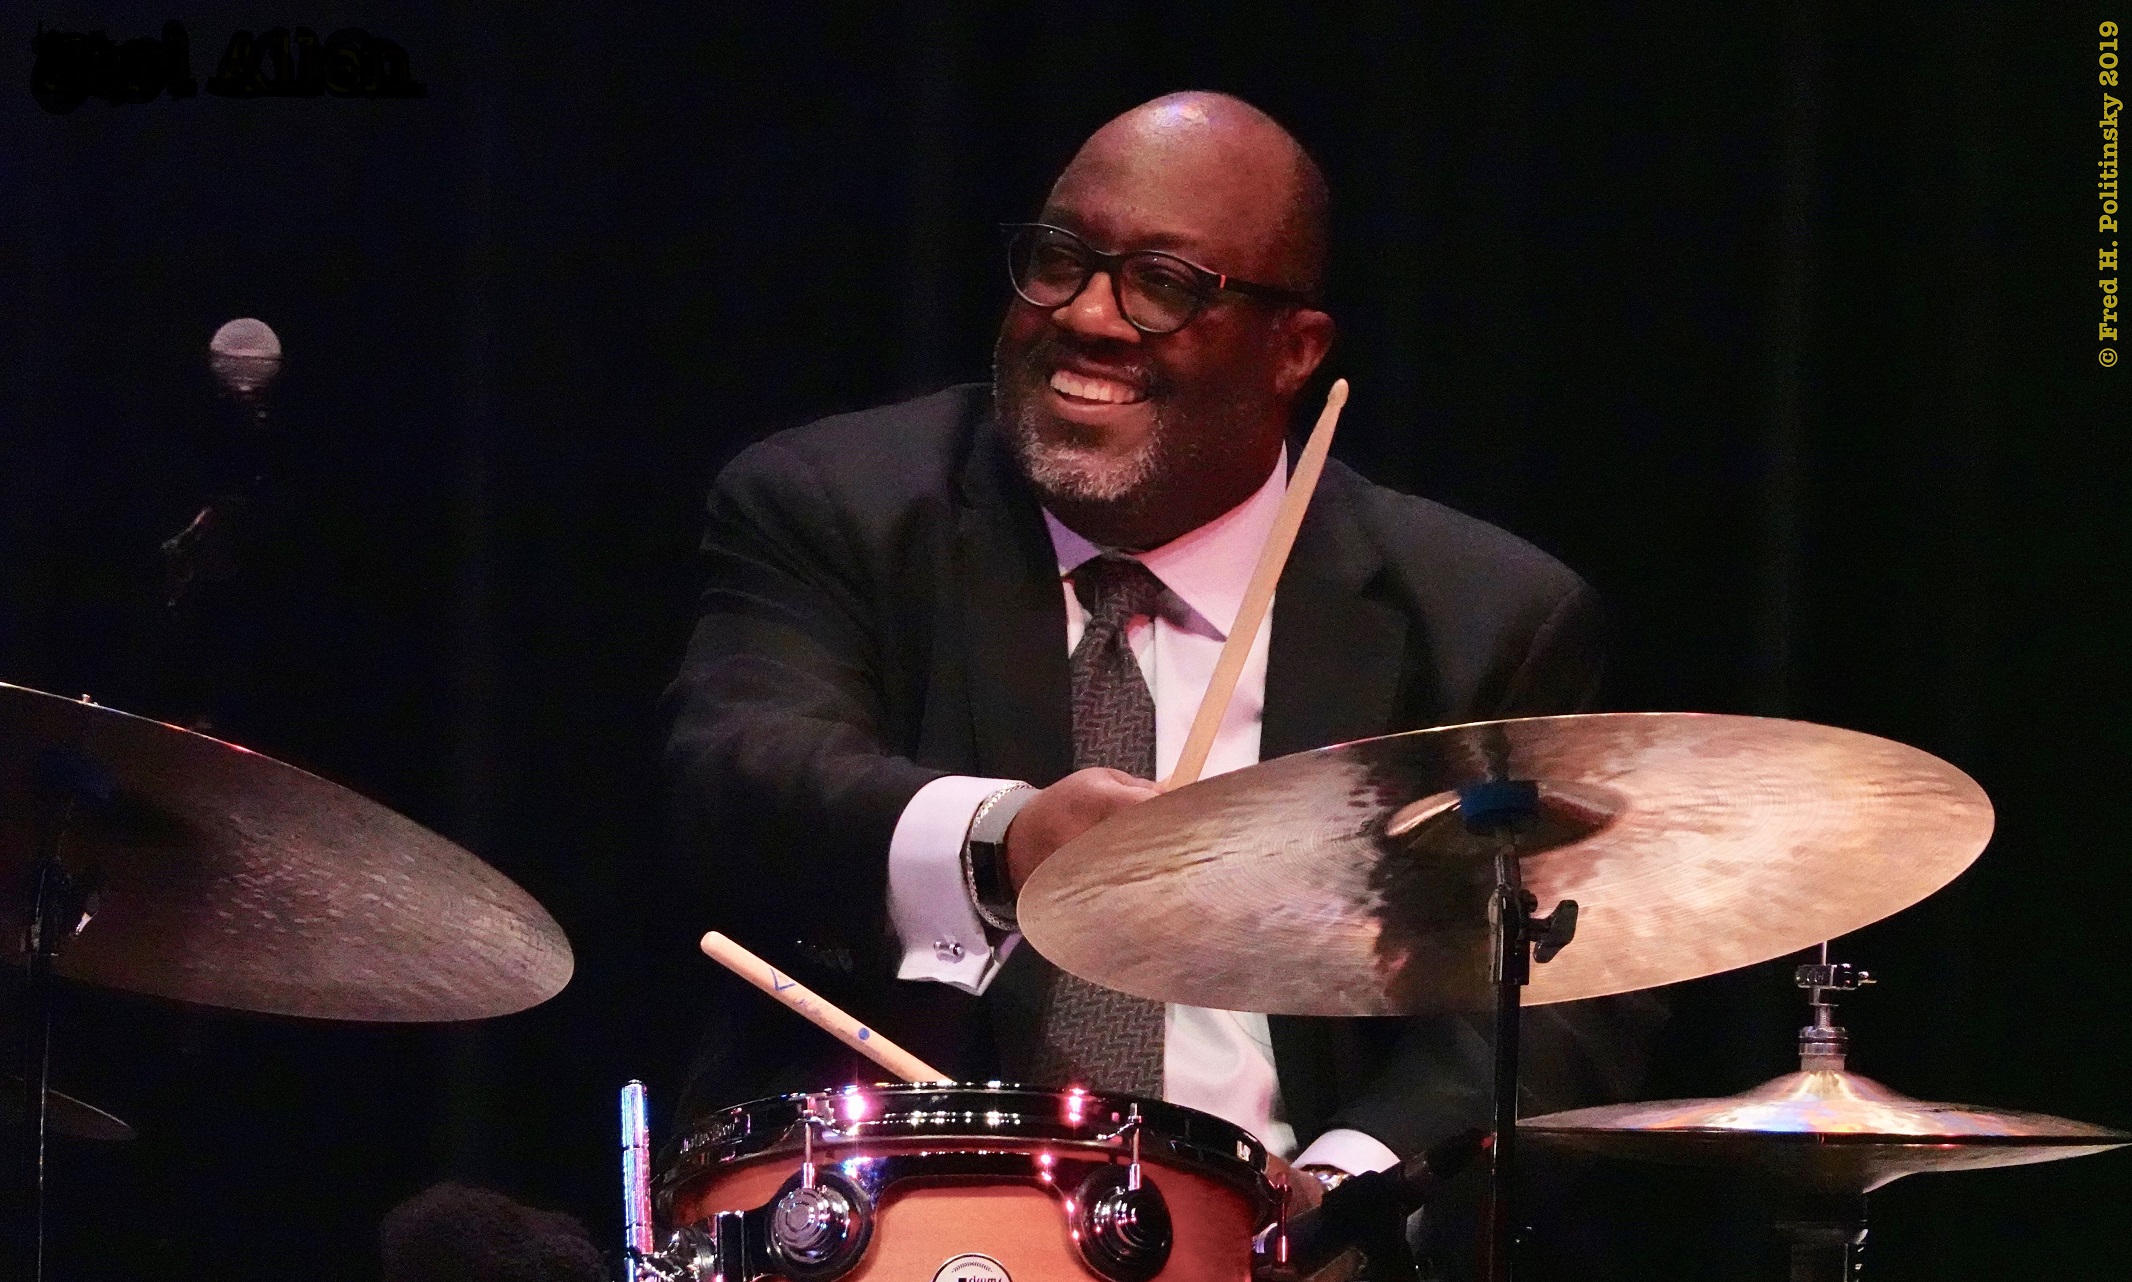 Carl Allen sits behind a drum set with drum sticks in his hand and smiles while looking to the side and playing